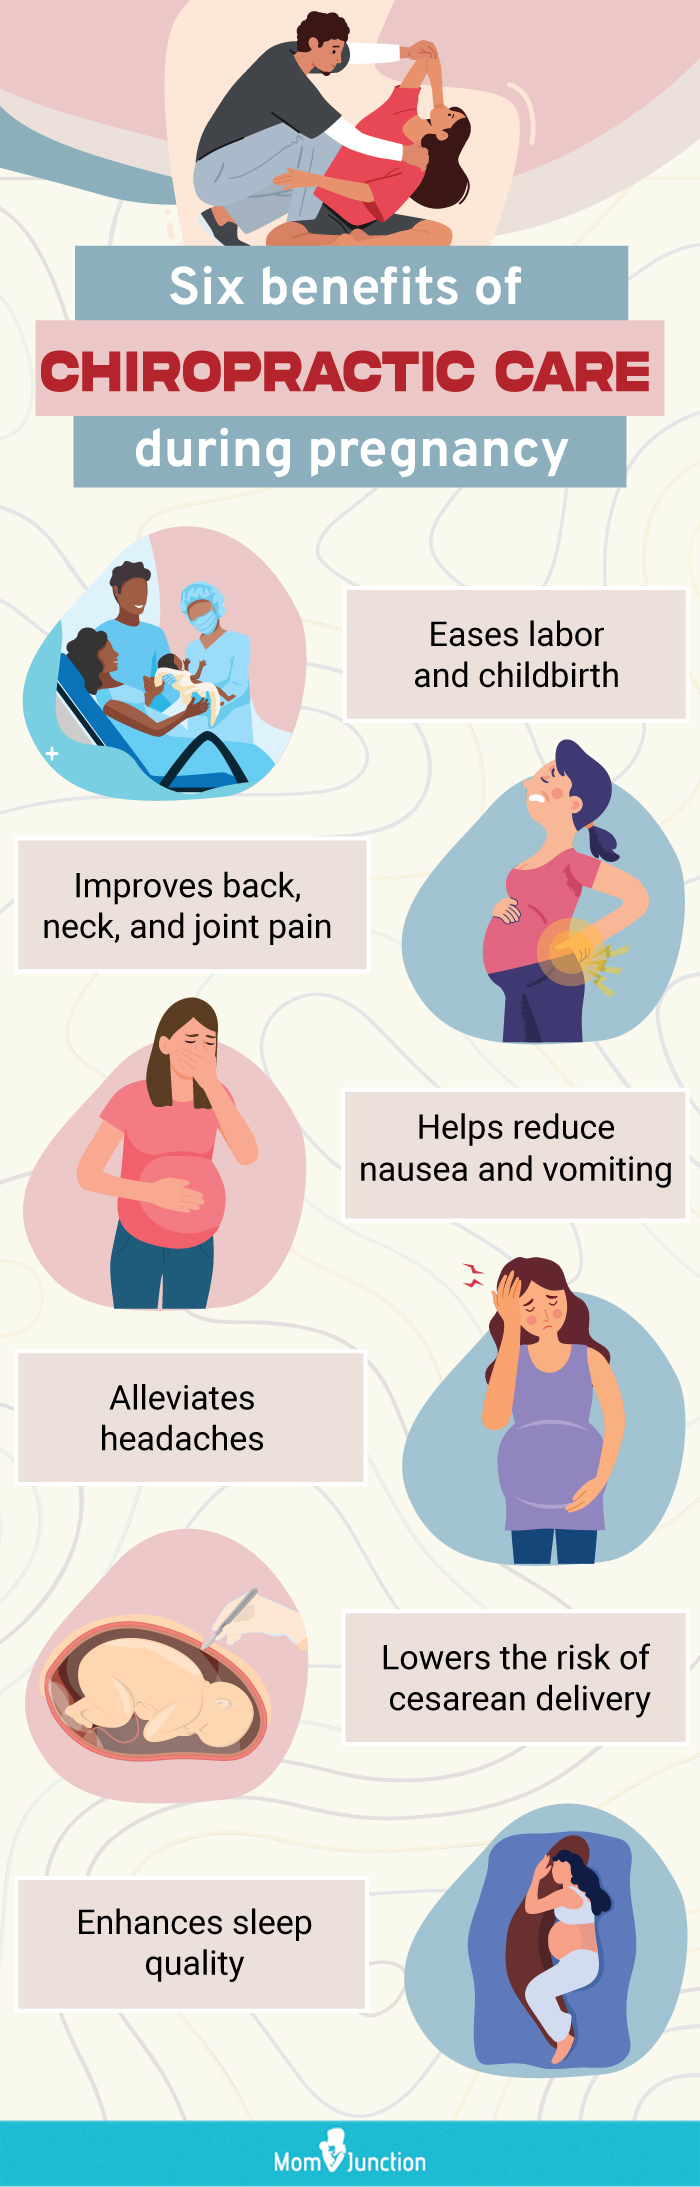 benefits of chiropractic care helps in pregnancy (infographic)